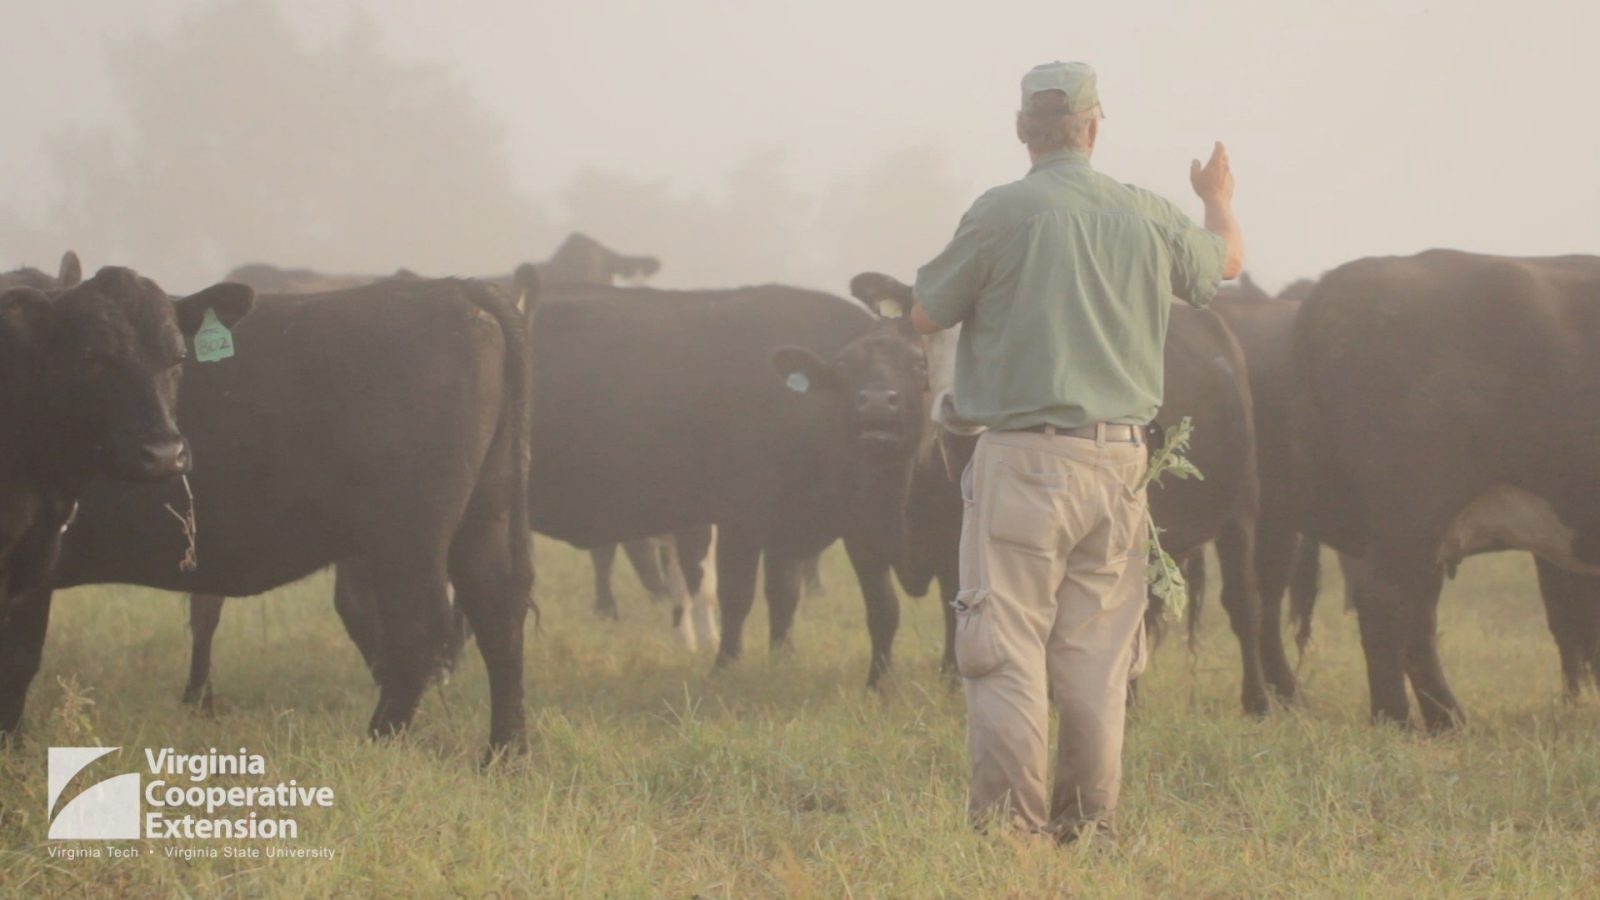 Mike Phillips of Valley View Farms inspecting his cattle.